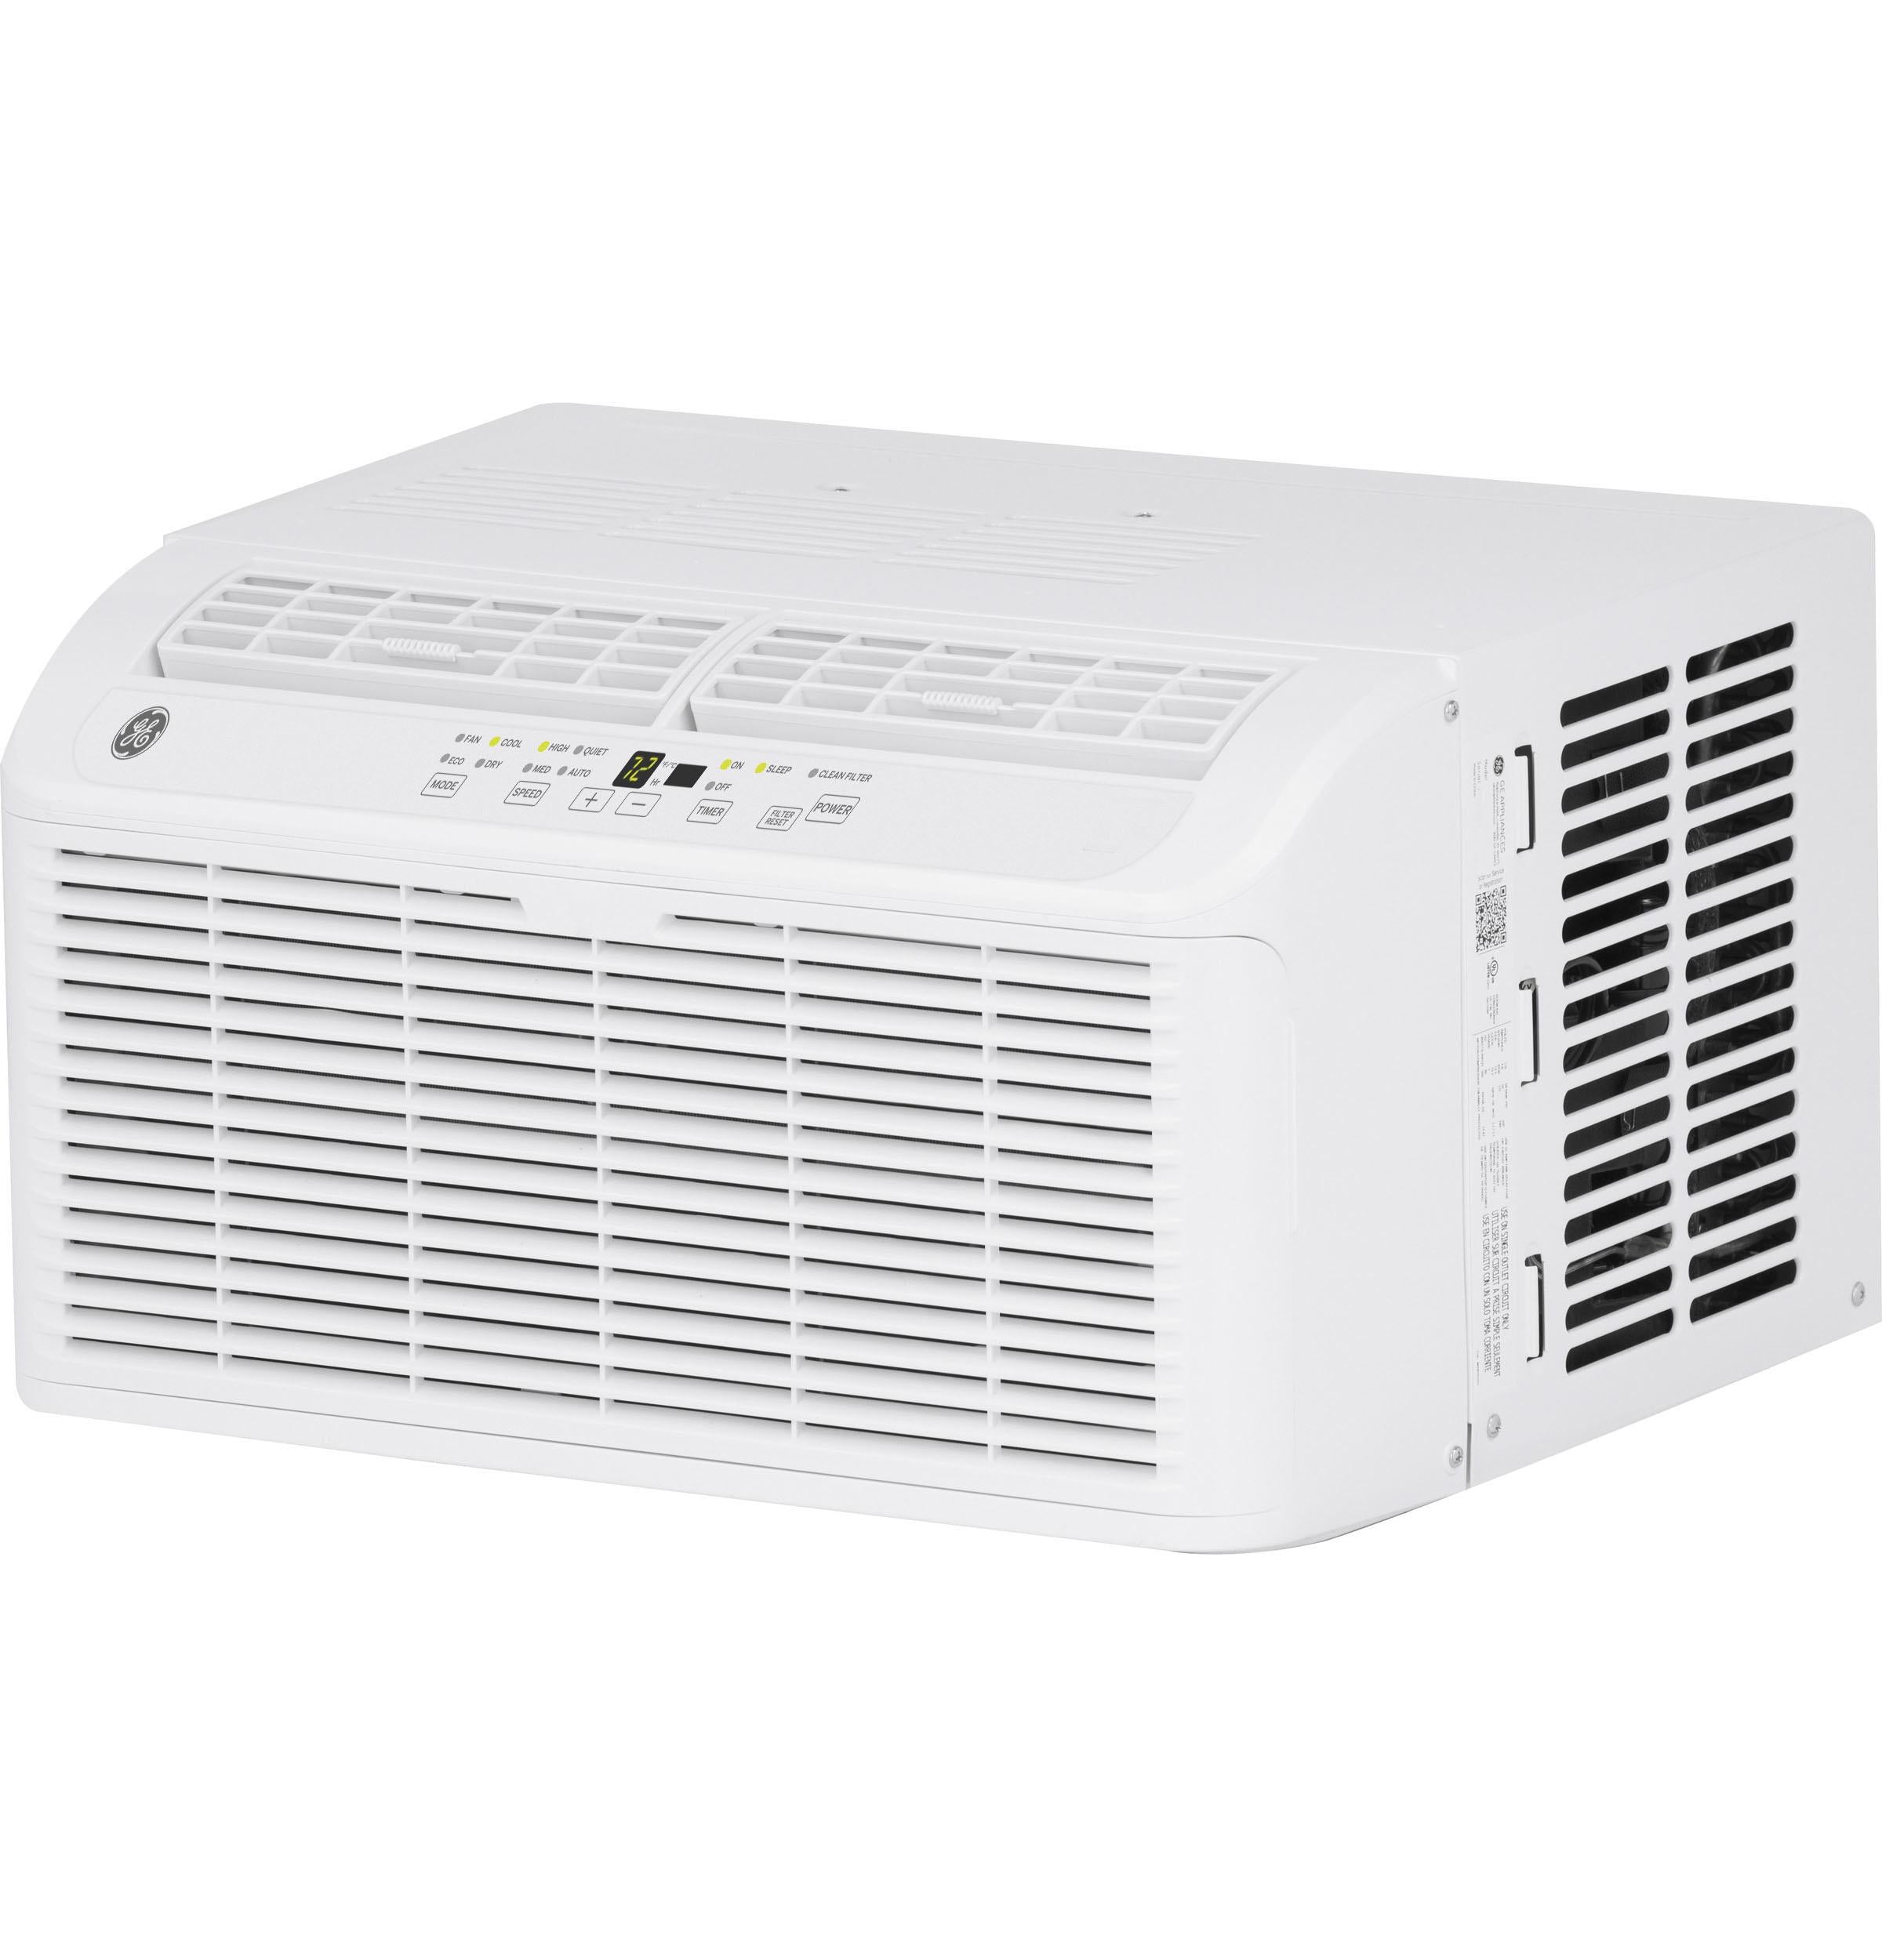 Ge Appliances AHEL06BB Ge® 6,200 Btu Ultra Quiet Window Air Conditioner For Small Rooms Up To 250 Sq. Ft.